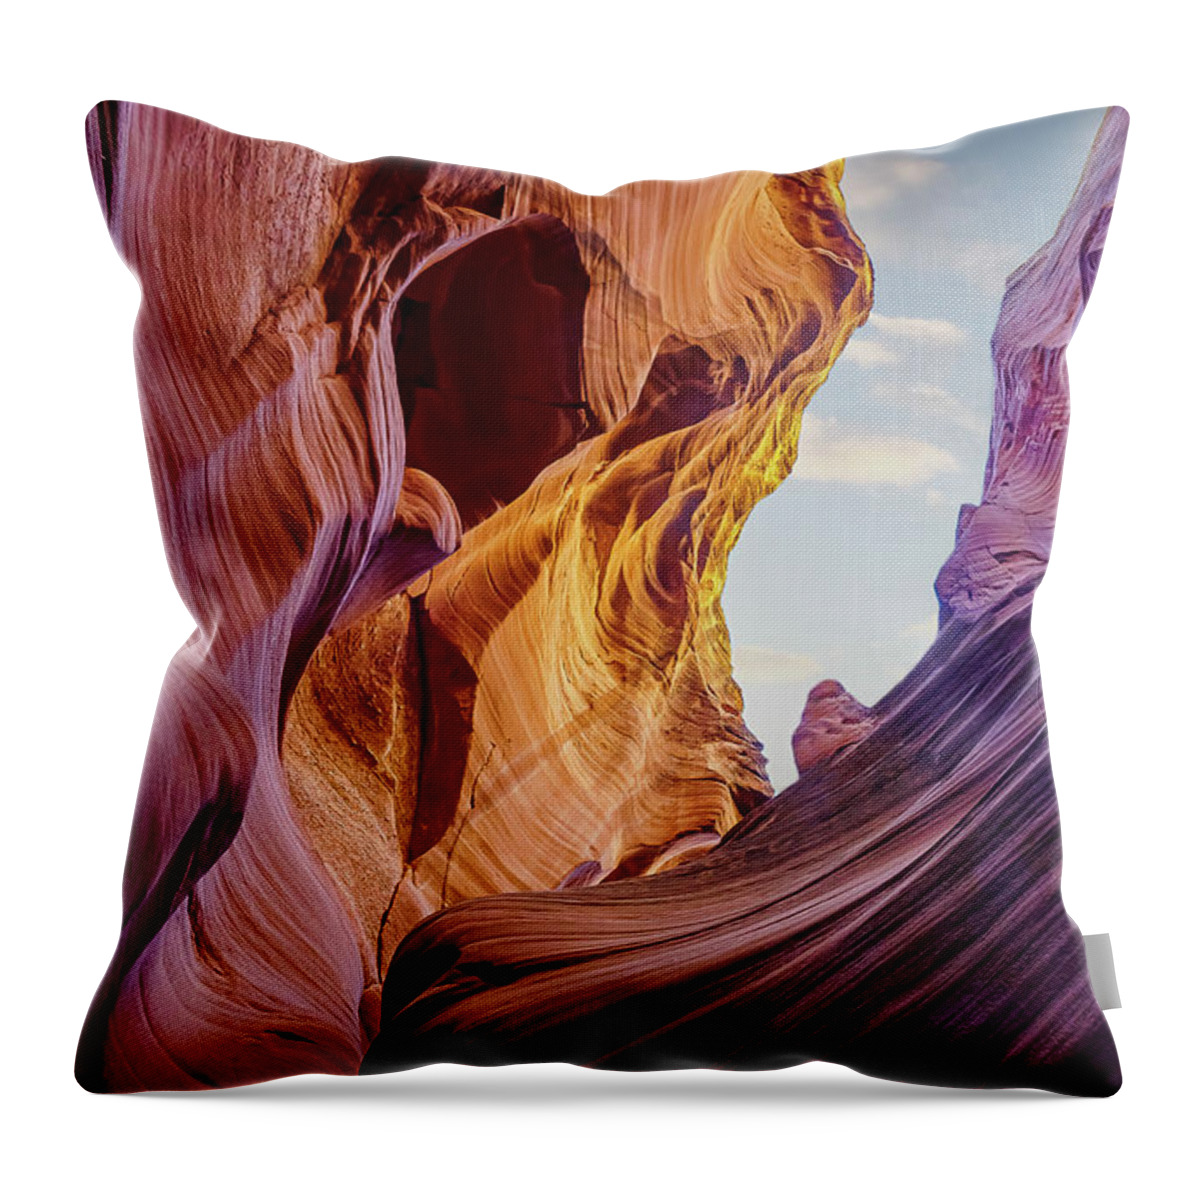 Landscape Throw Pillow featuring the photograph Antilope Series 20 by Silvia Marcoschamer